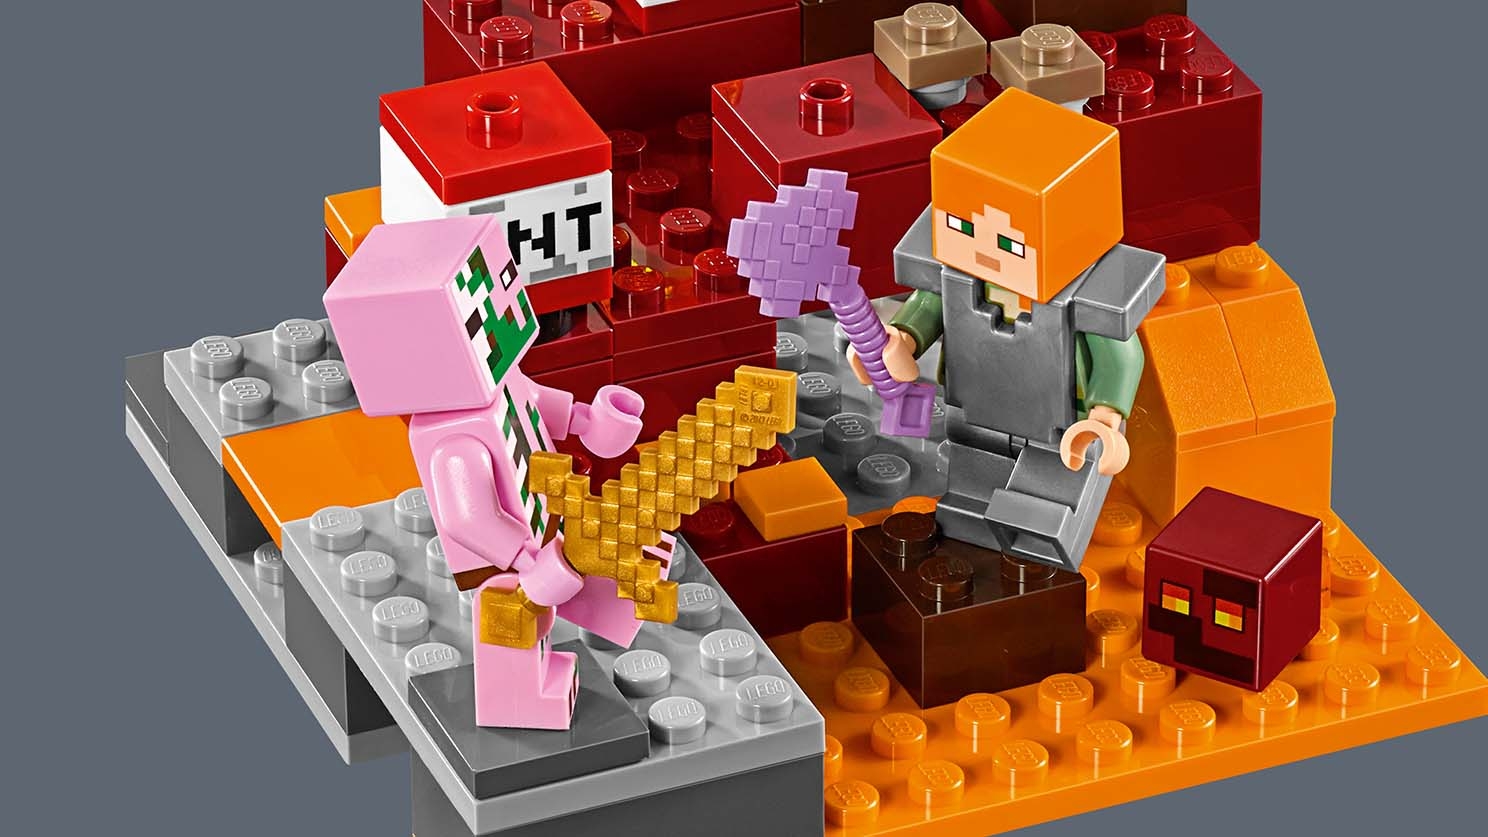 The Nether Fight Lego Minecraft Sets Lego Com For Kids